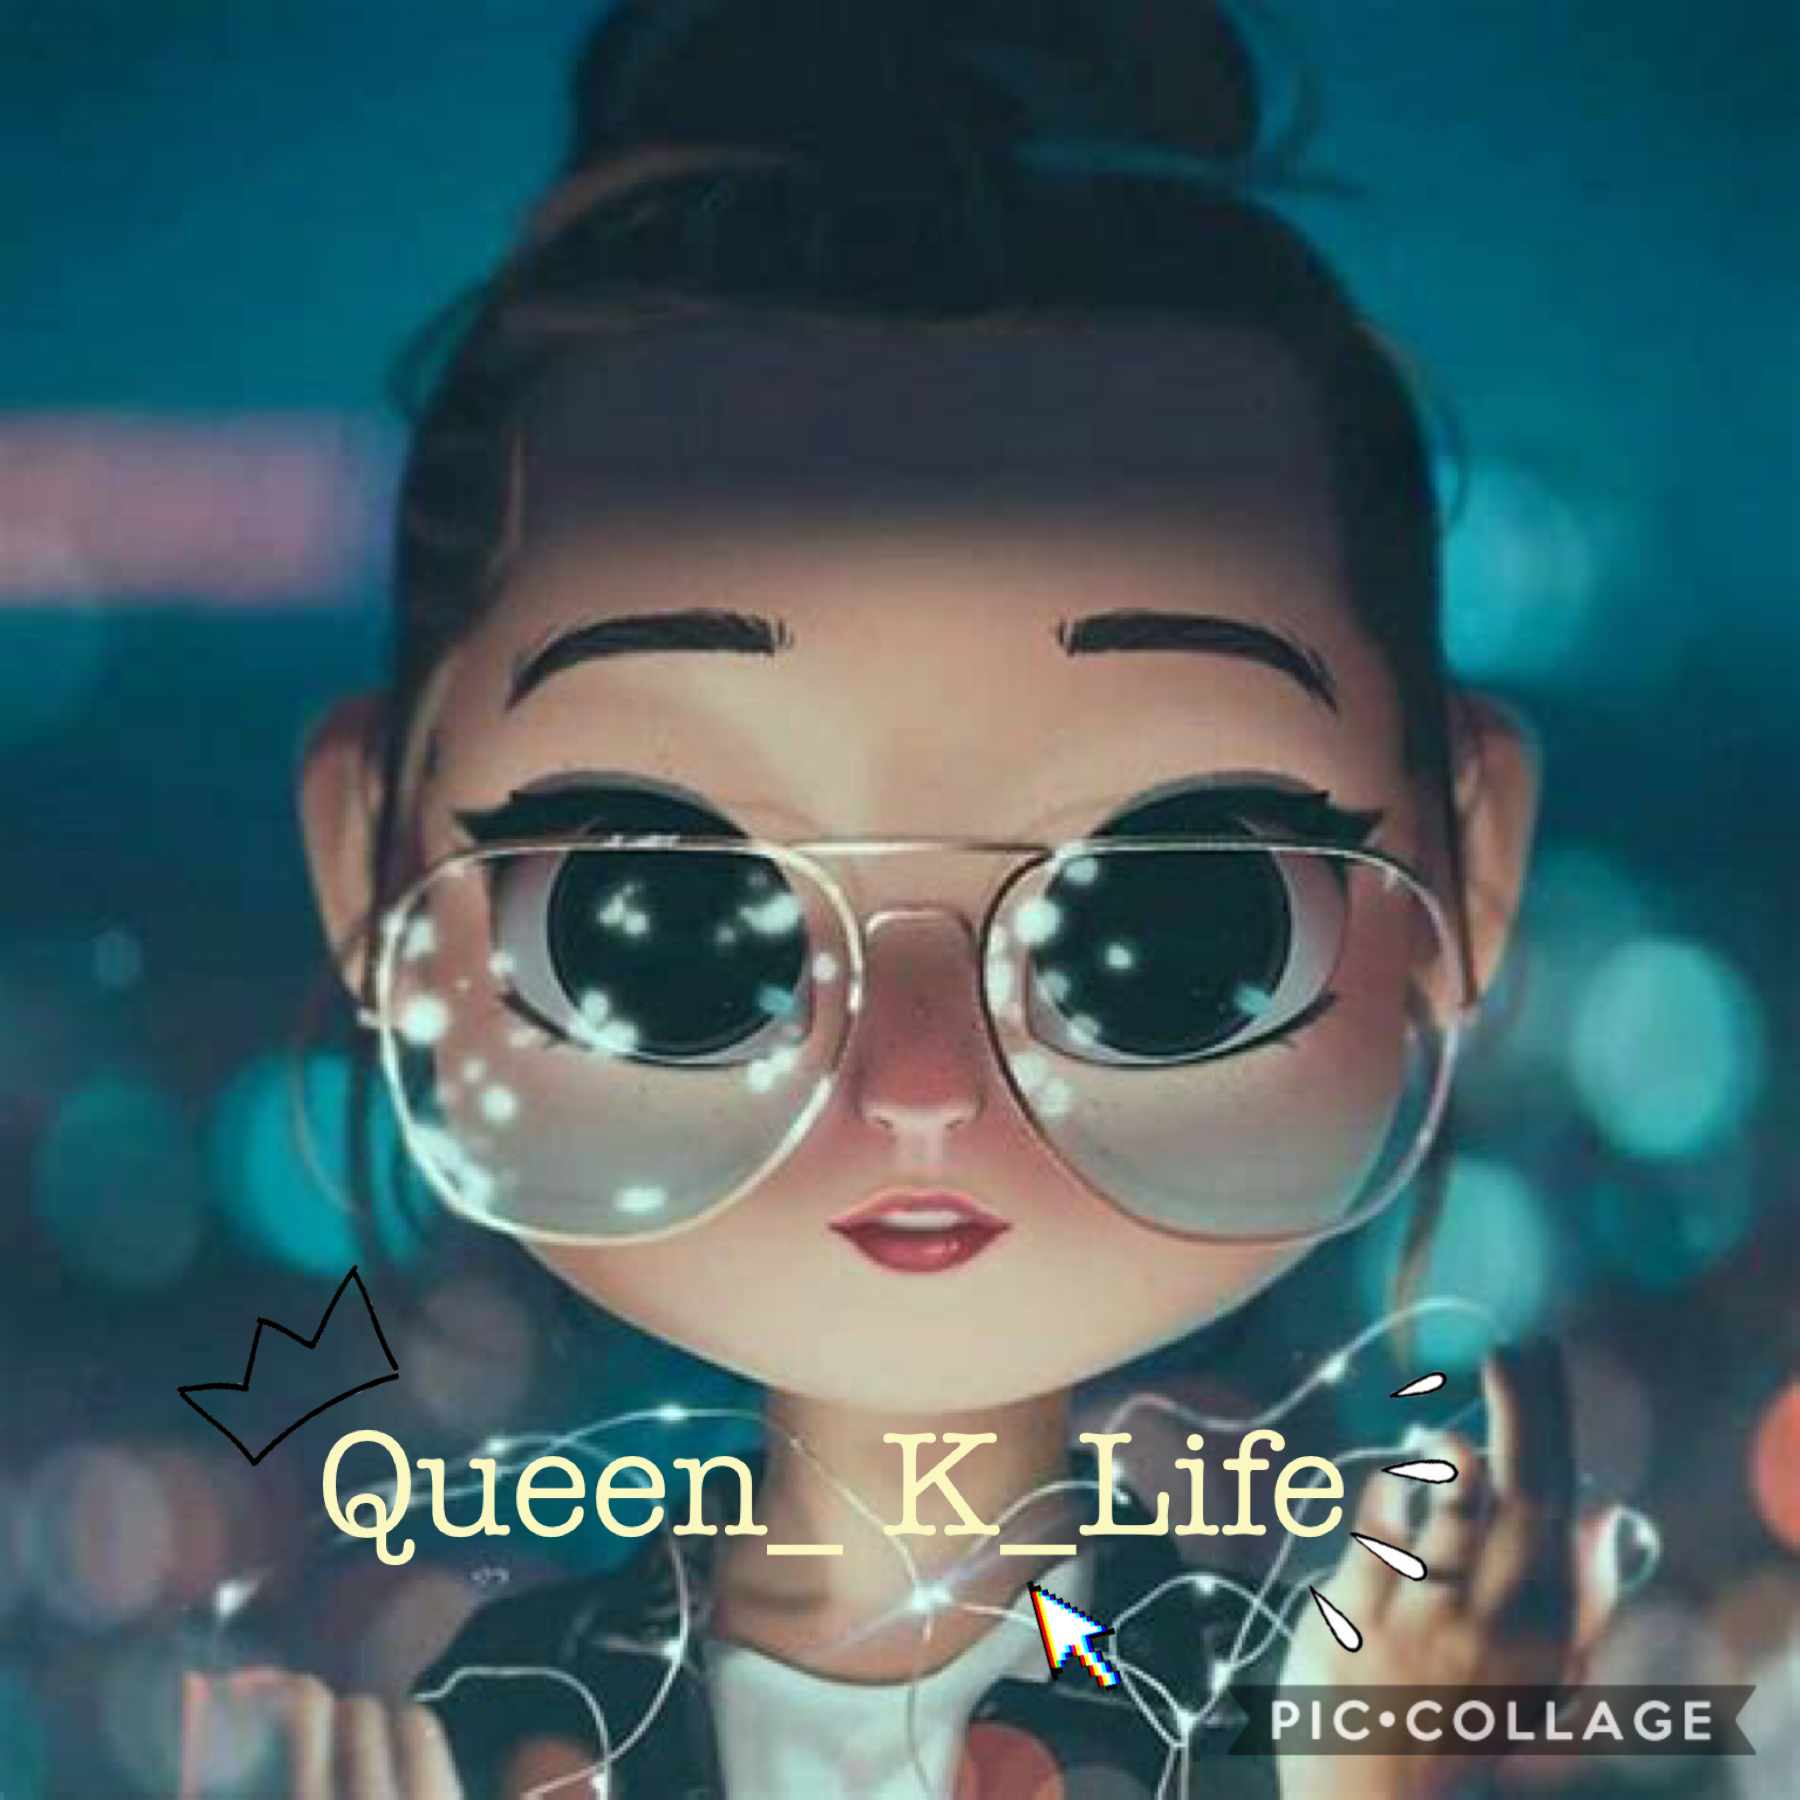 Make sure to check Queen_K_Life